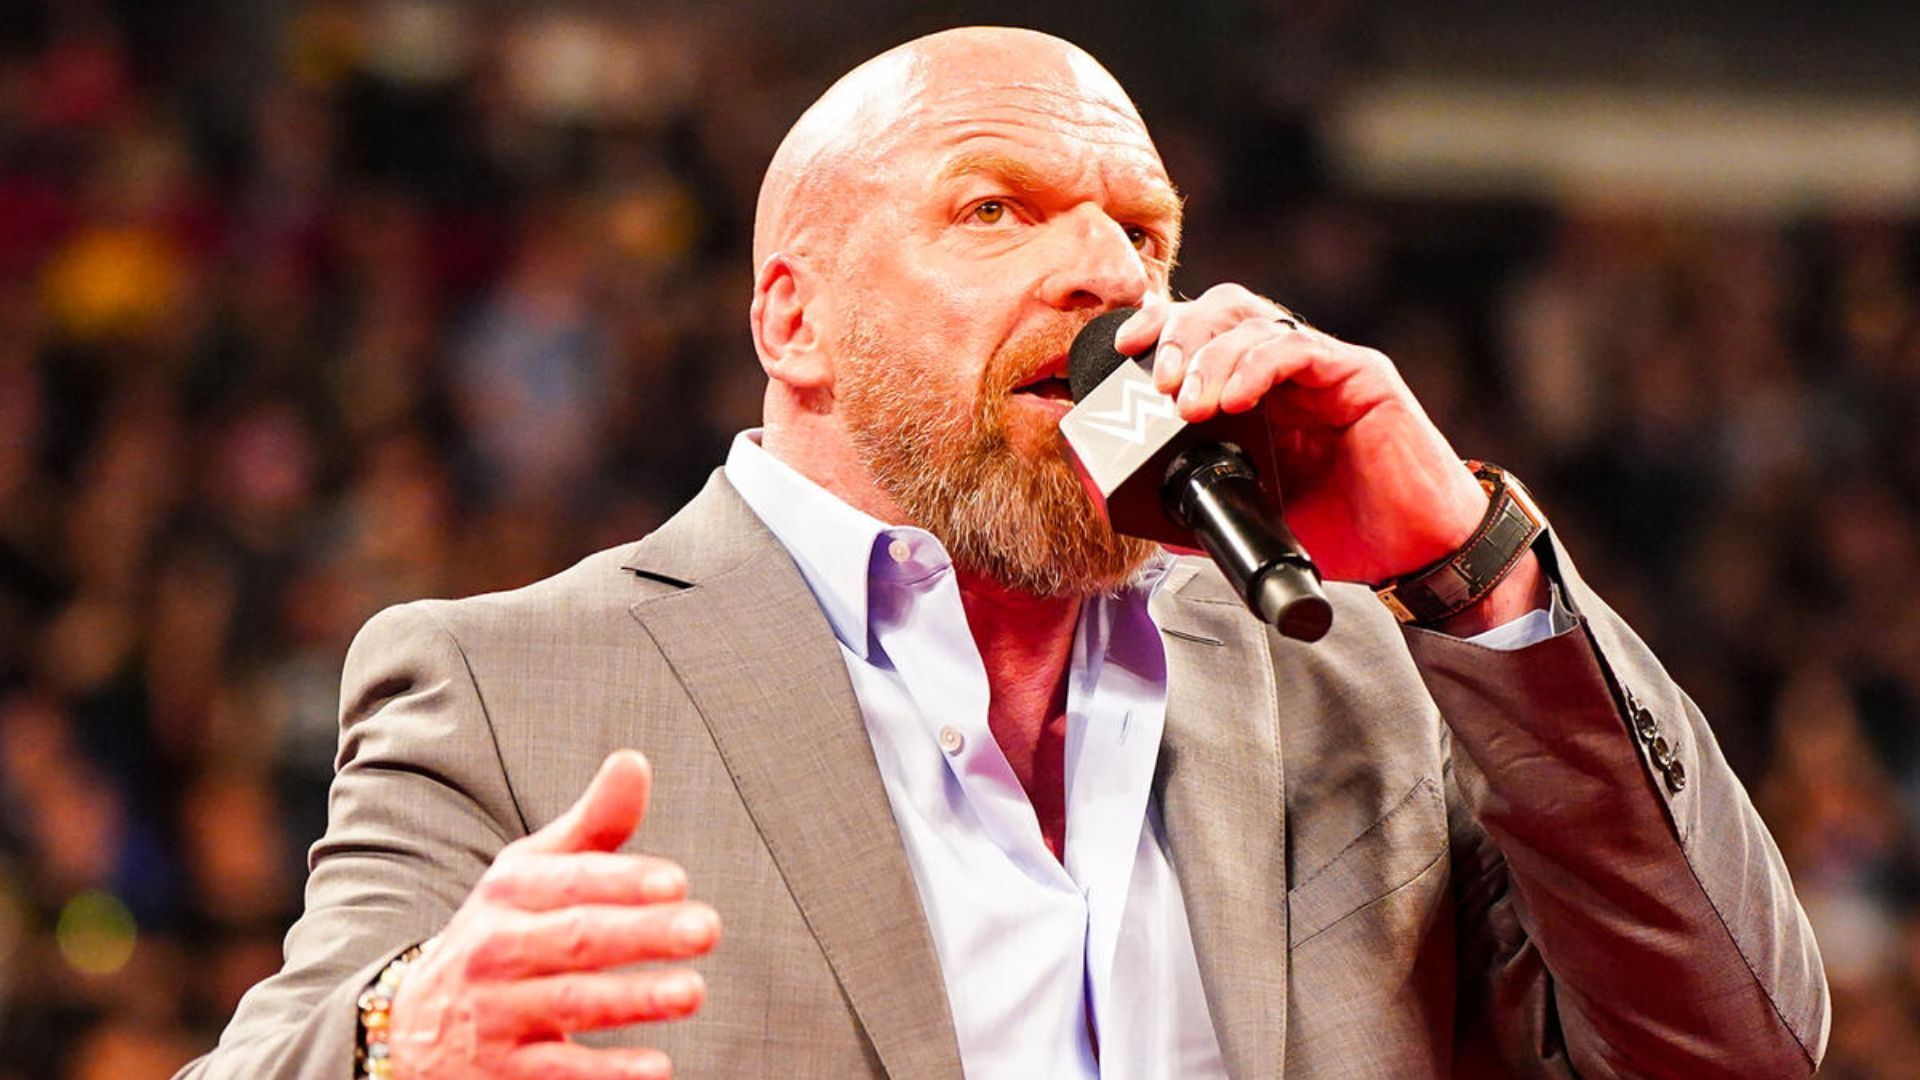 Triple H is praised for reviving the WWE product [Photo credit: WWE]